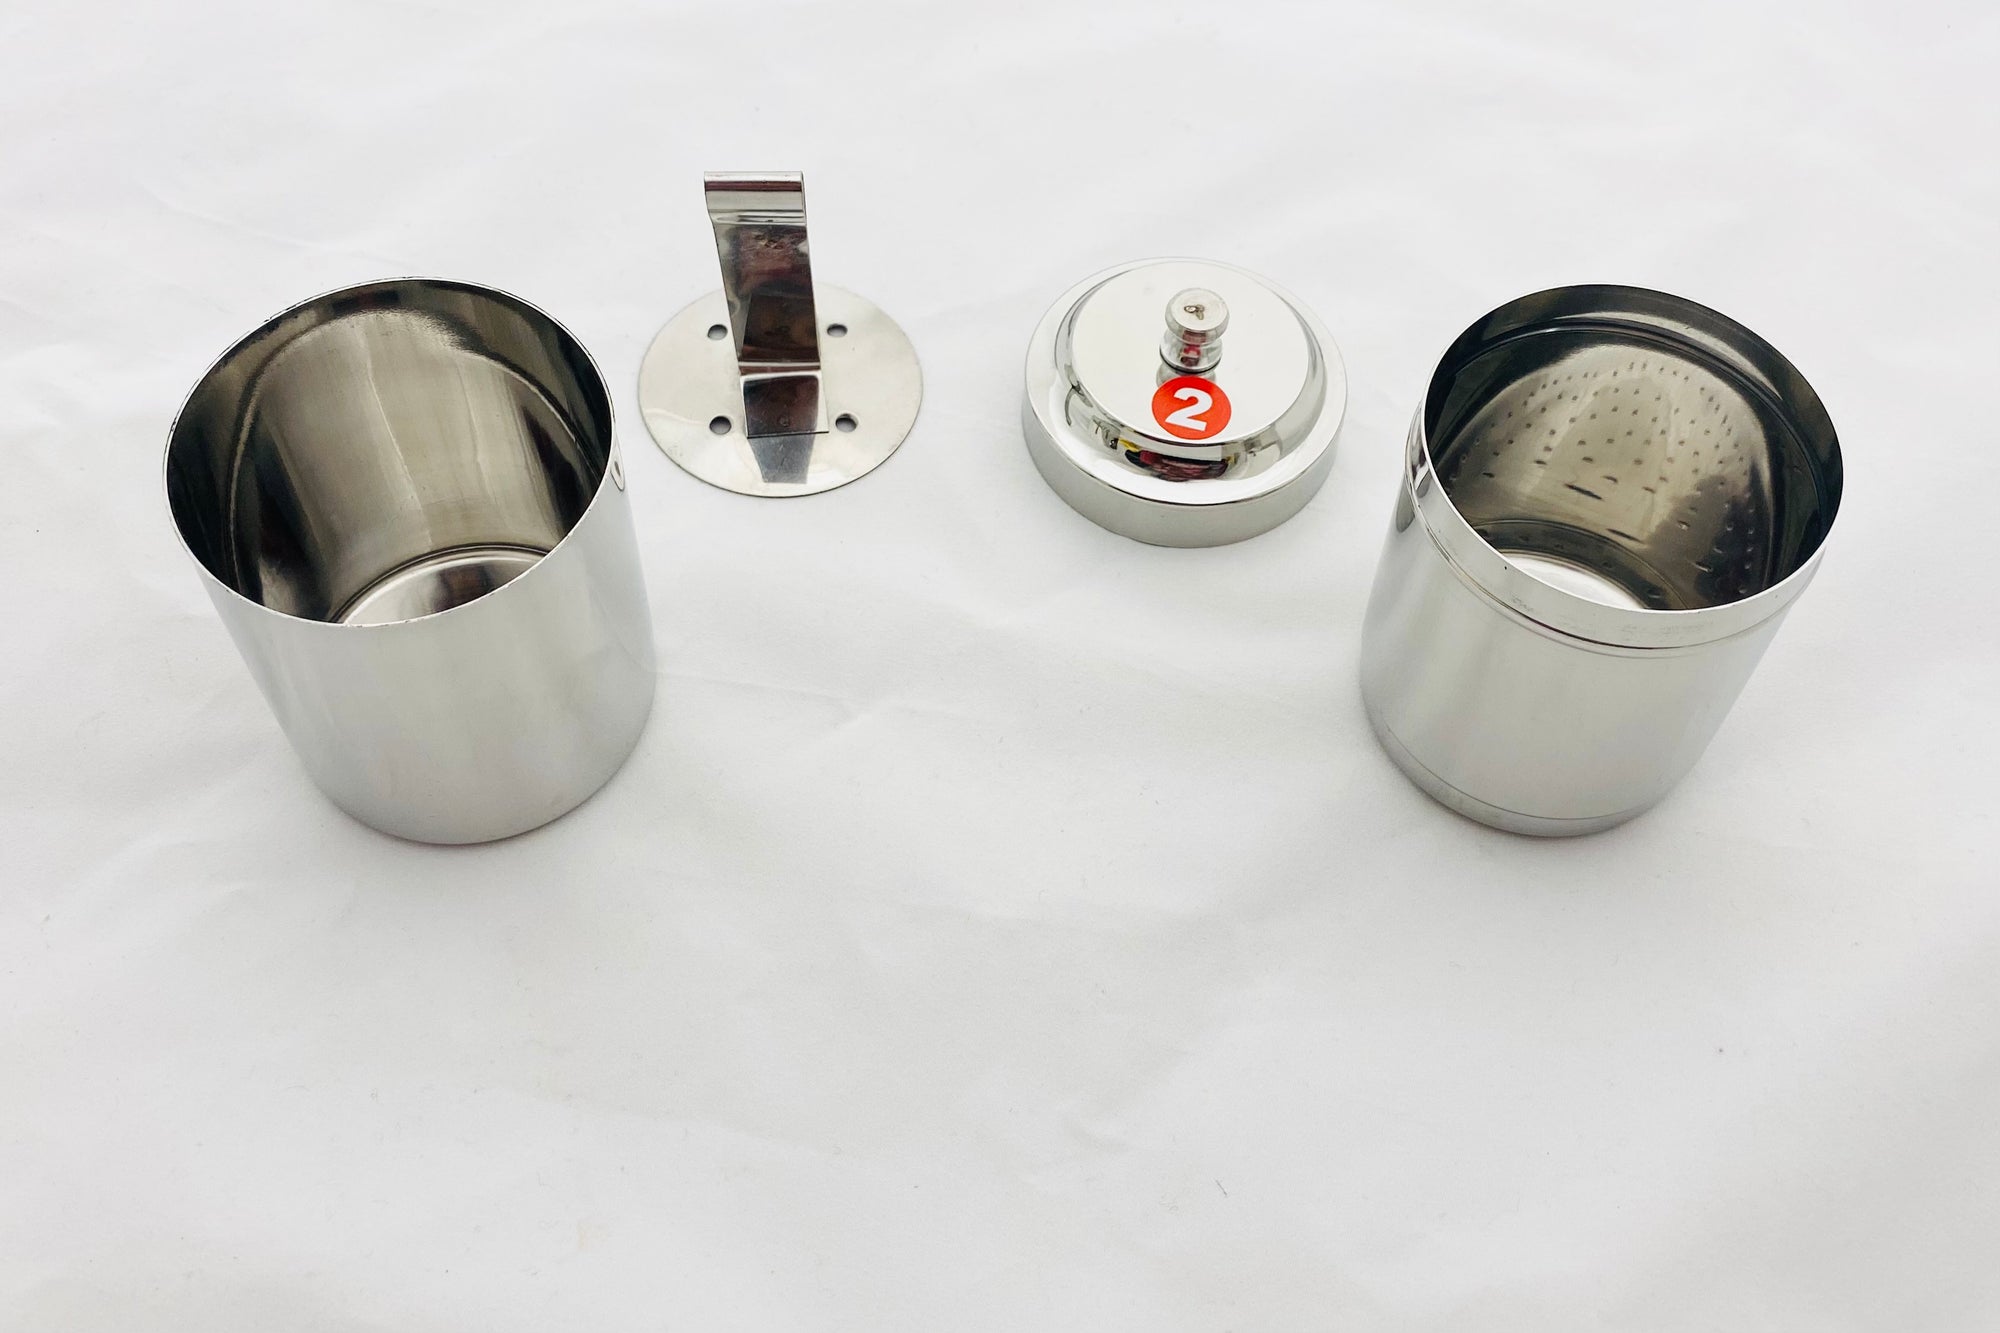 Stainless Steel South Indian Filter Coffee Drip Maker - Diamond Trading Inc